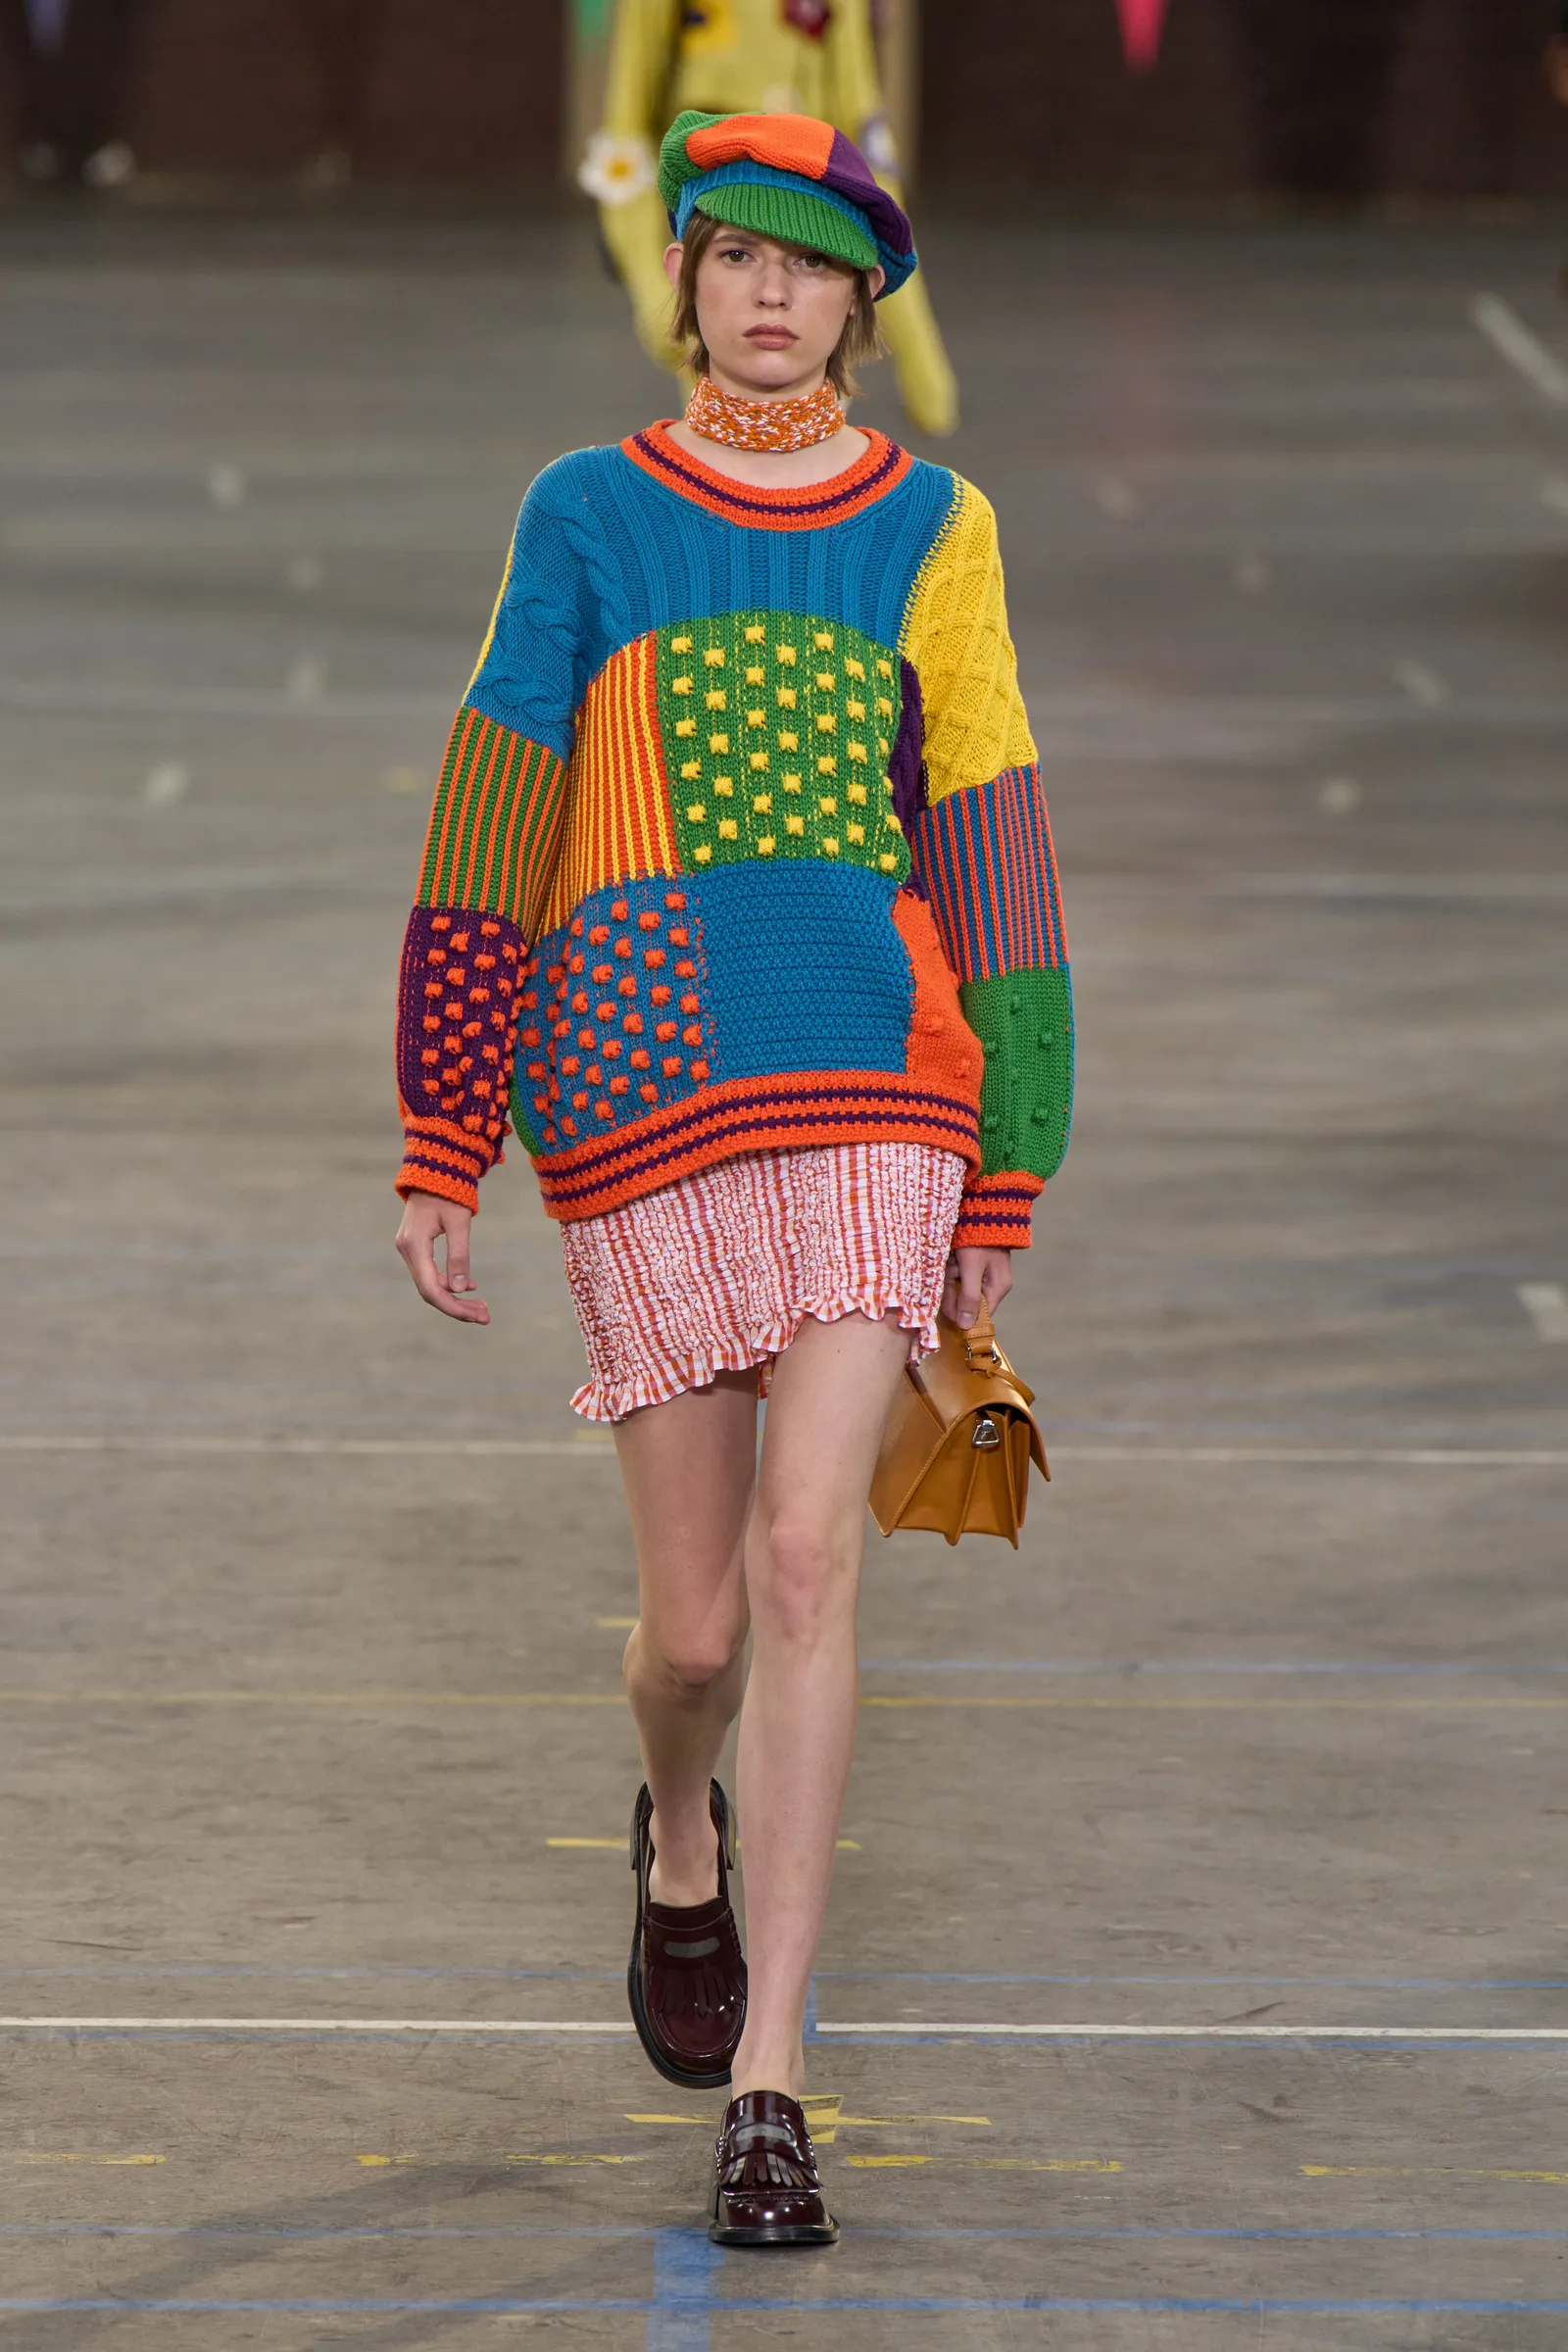 Kenzo Spring 2023 Ready To Wear Runway Collection